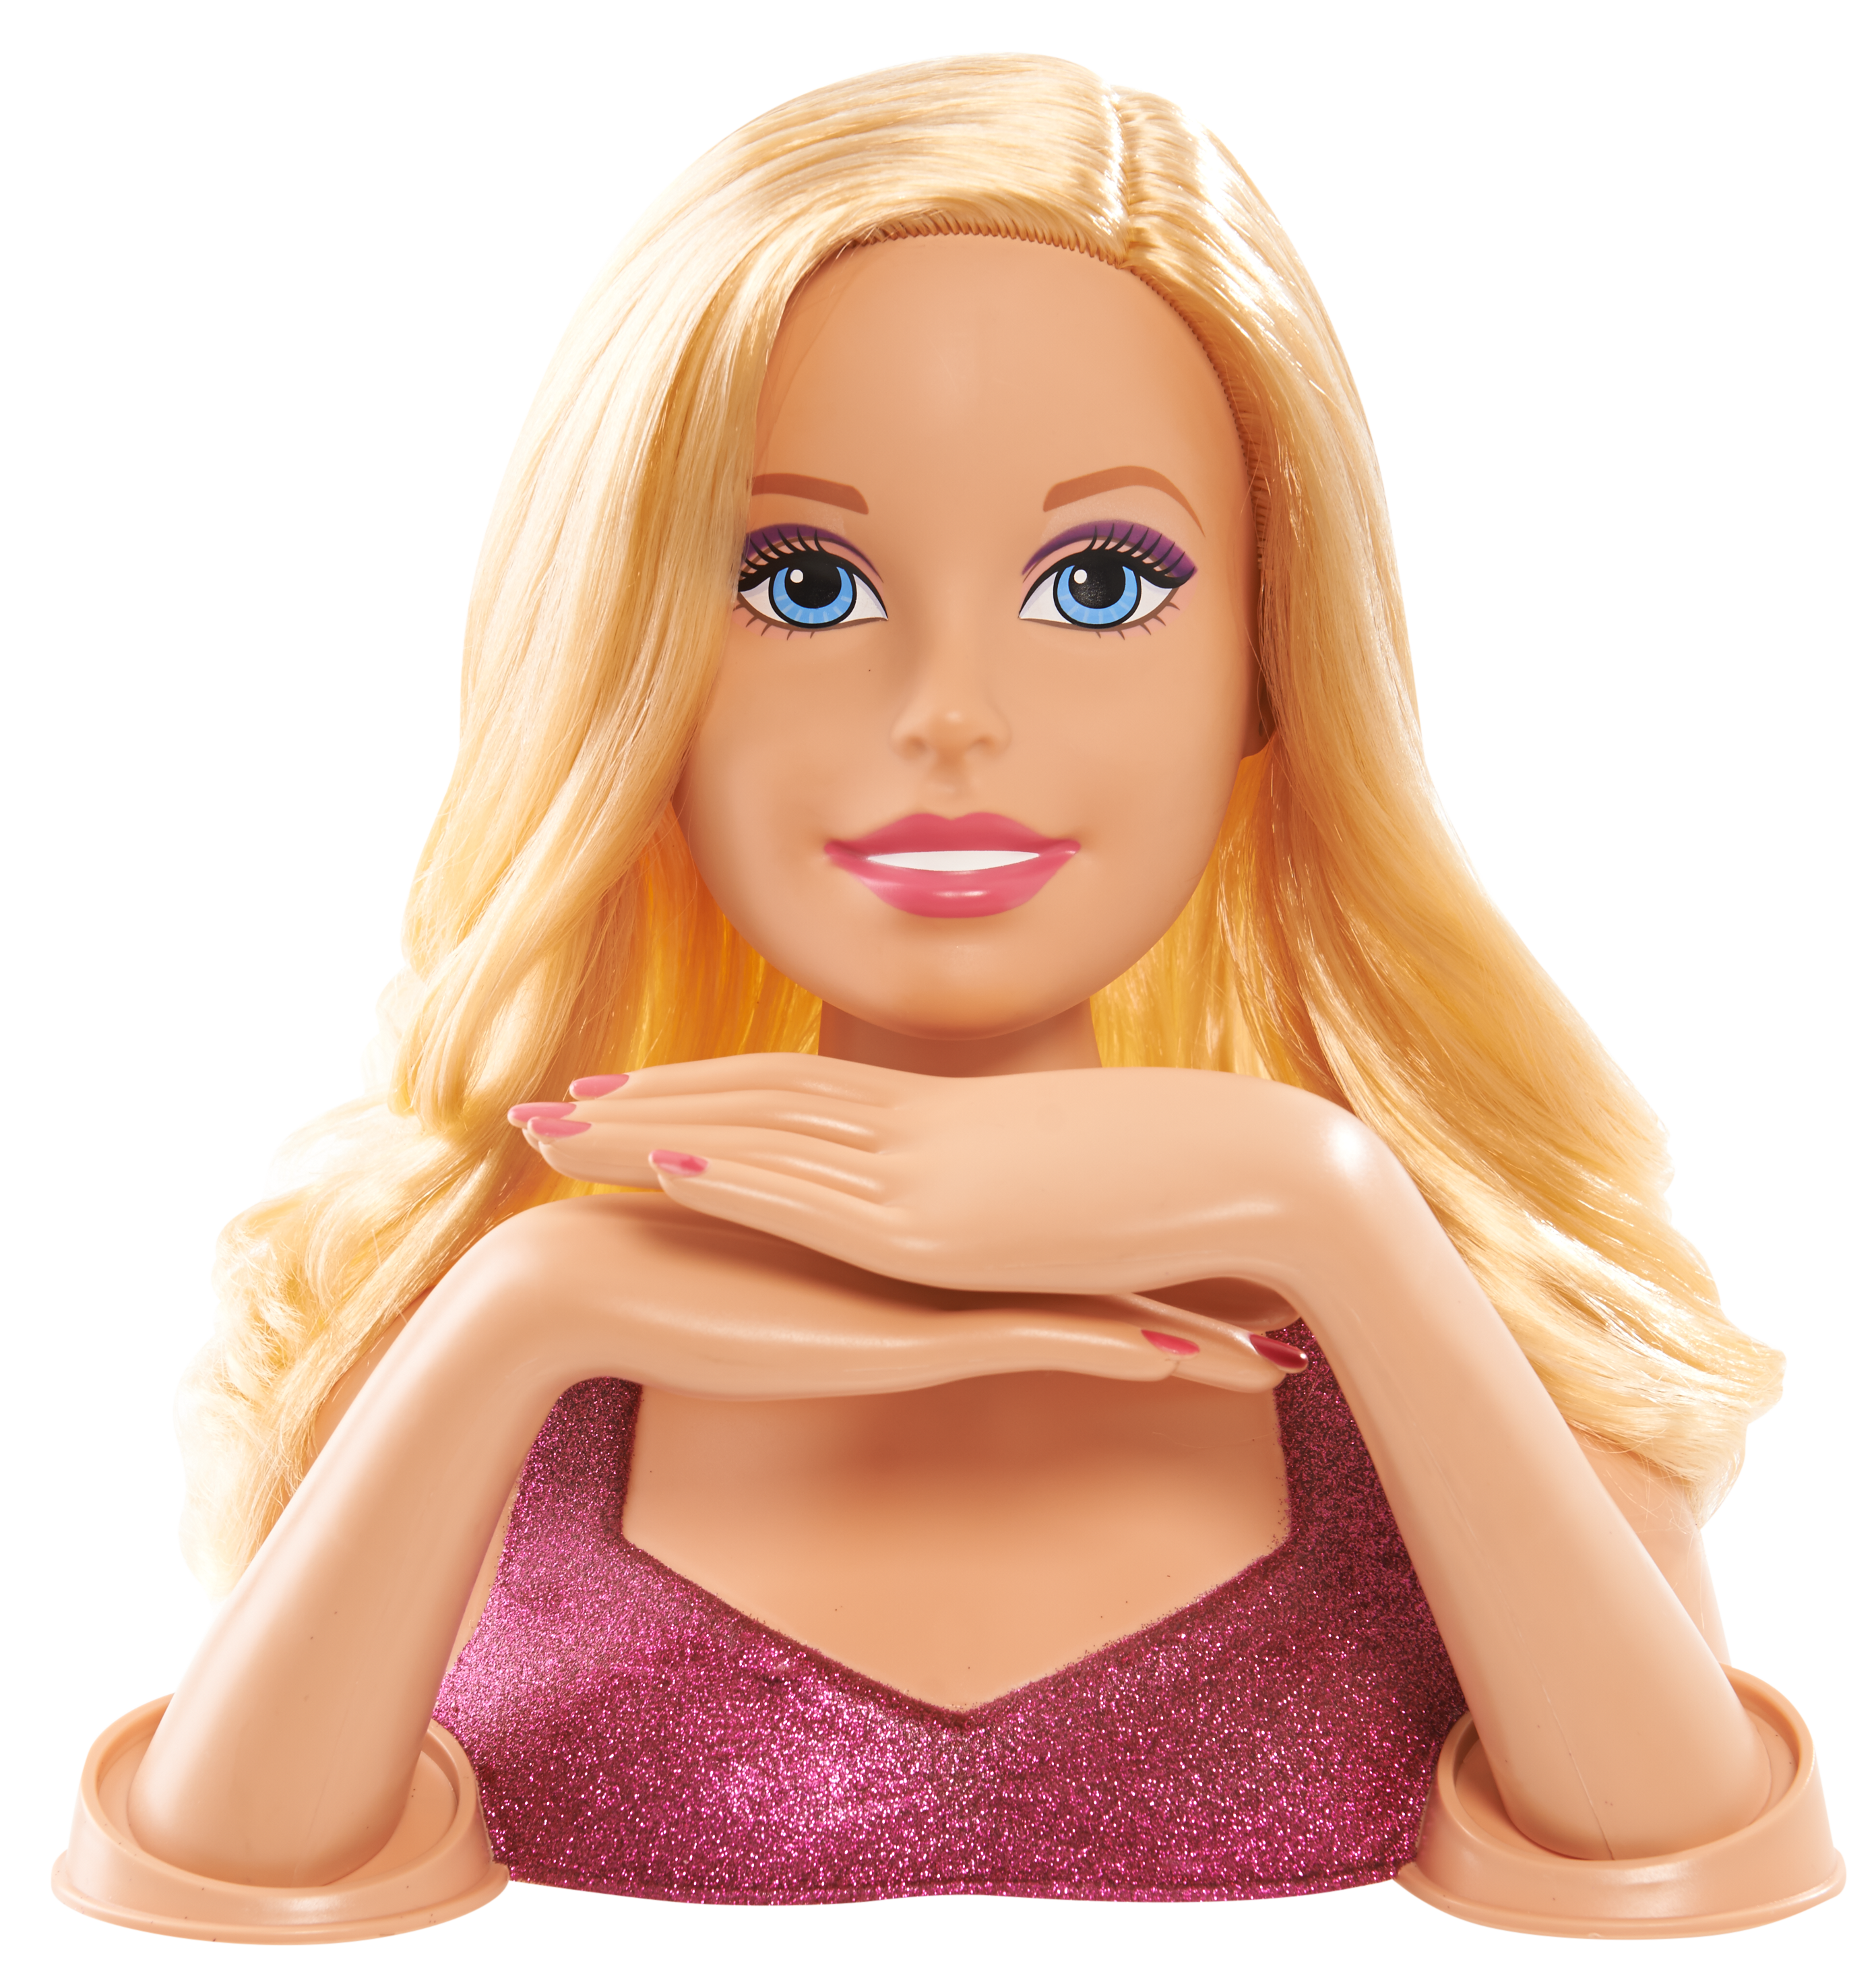 Download Barbie Doll PNG Image for Free.